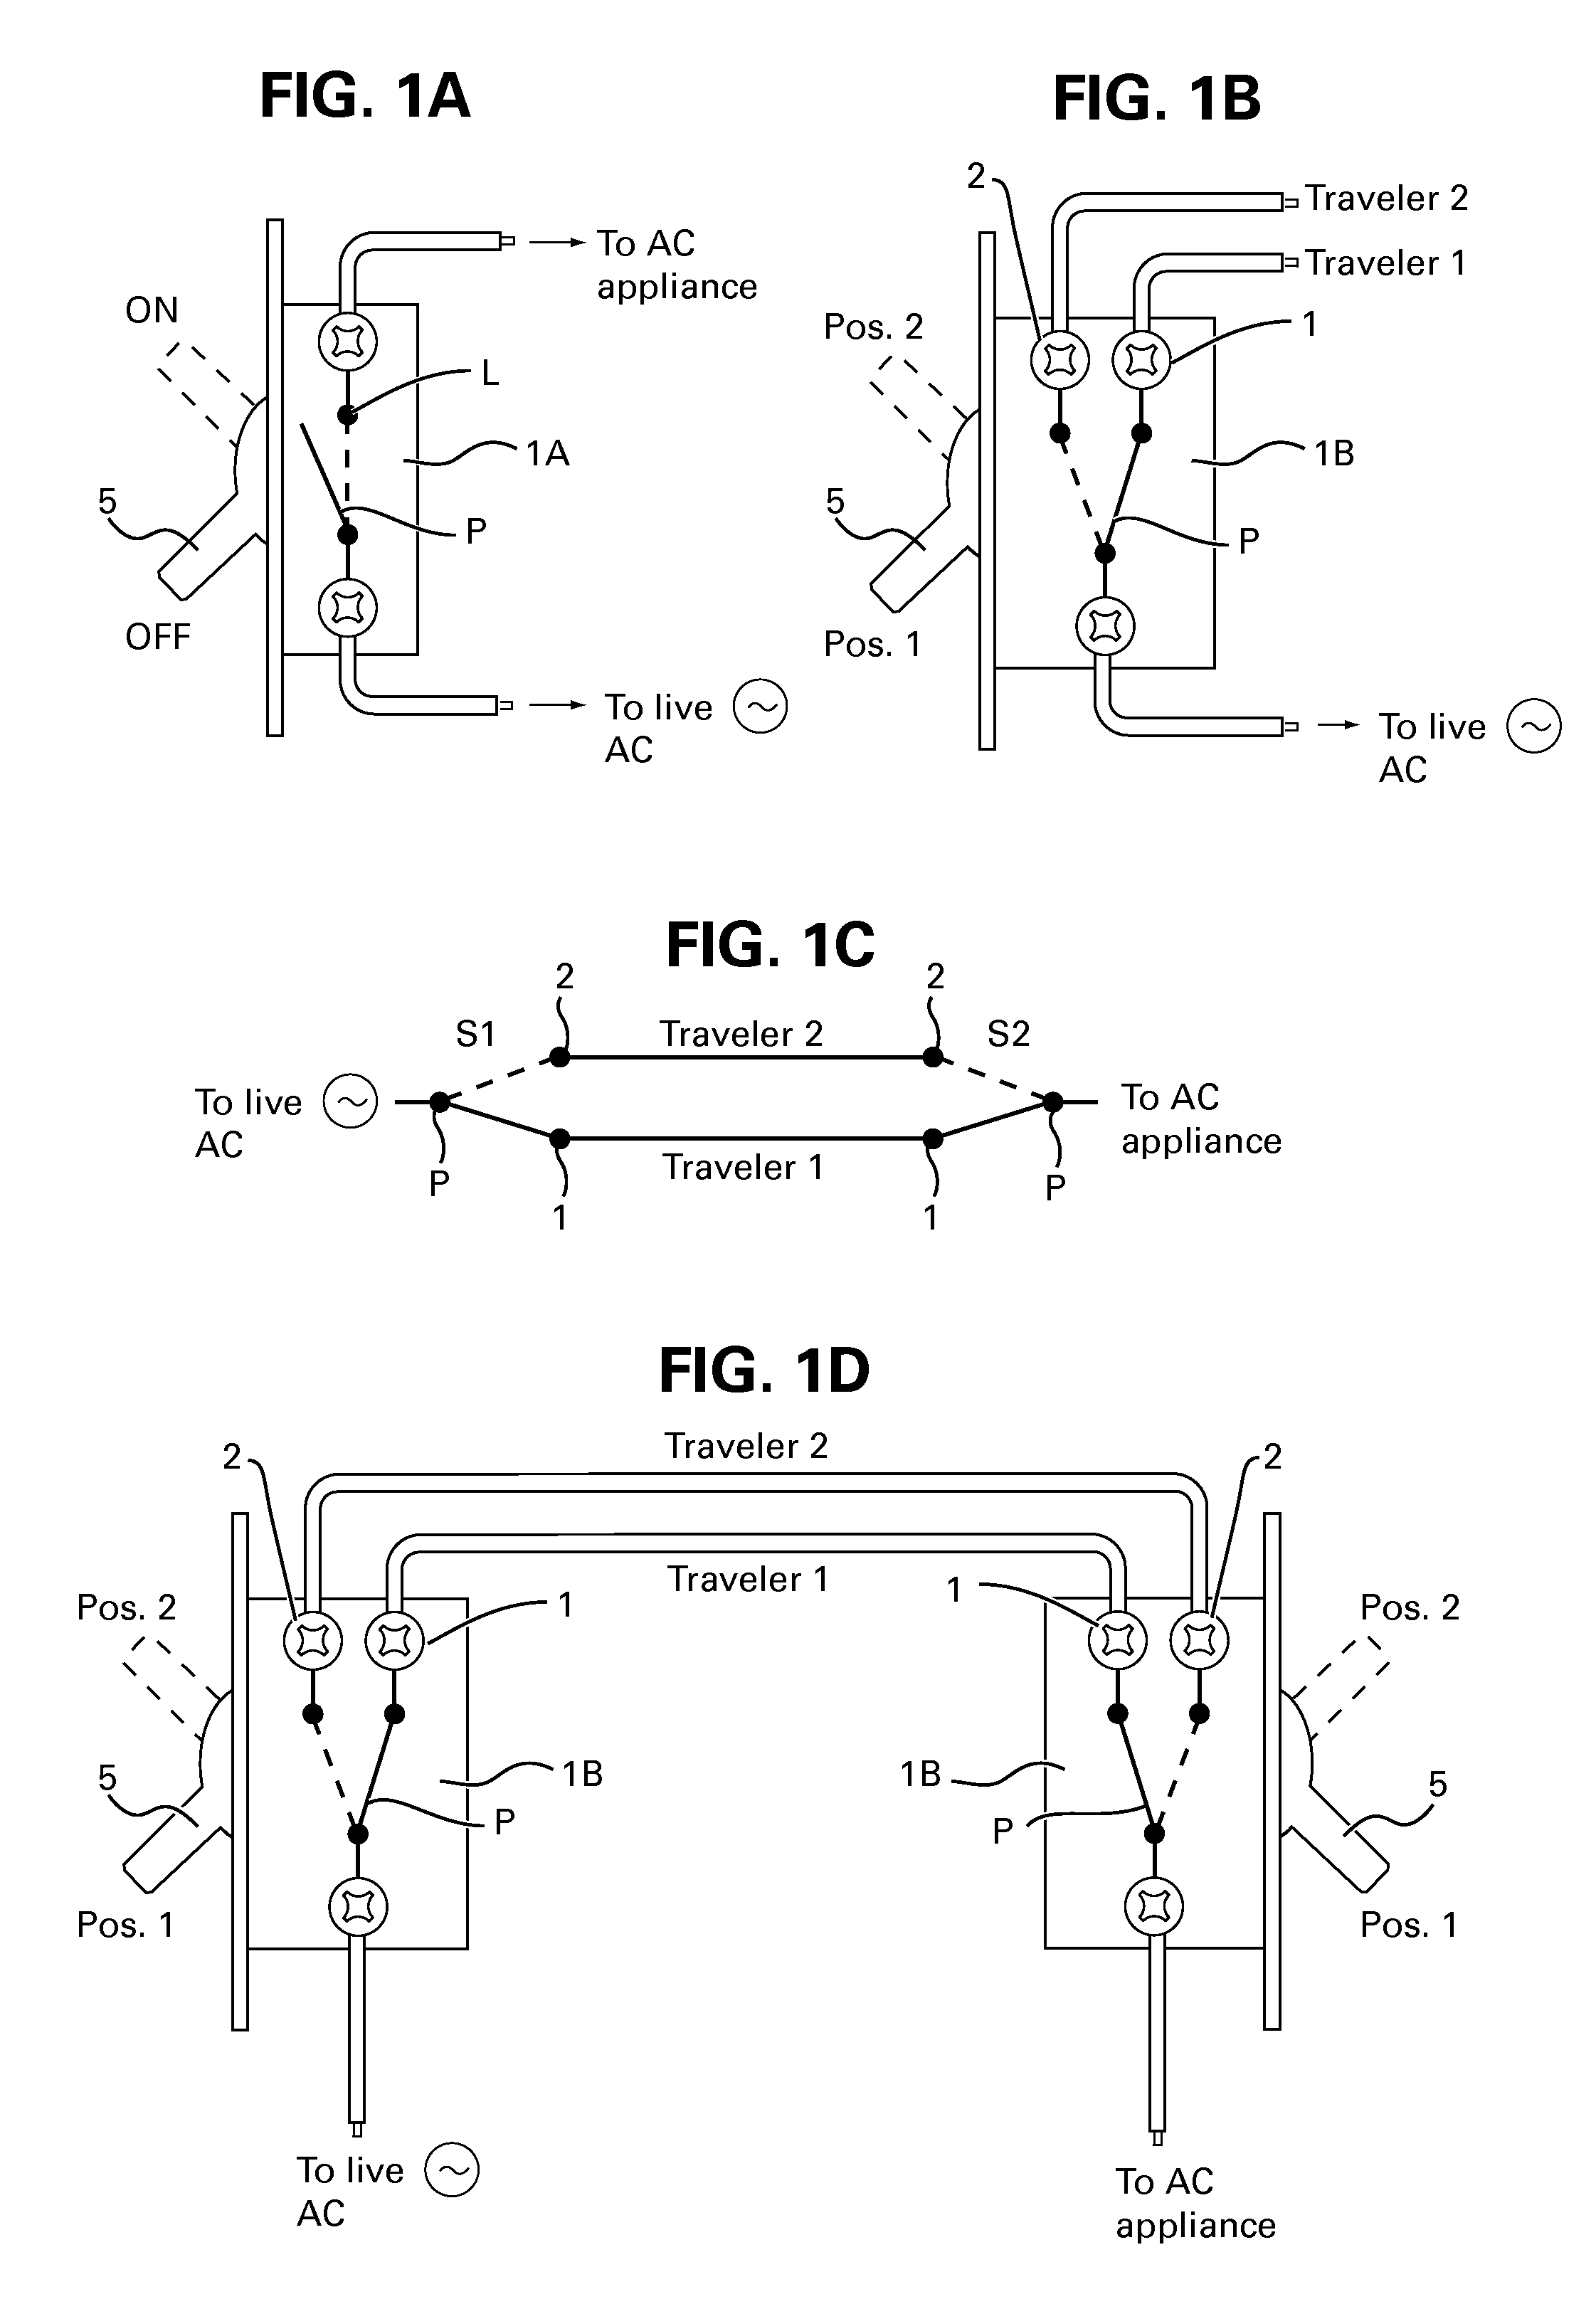 Method and apparatus for remotely operating AC powered appliances from video interphones or shopping terminals